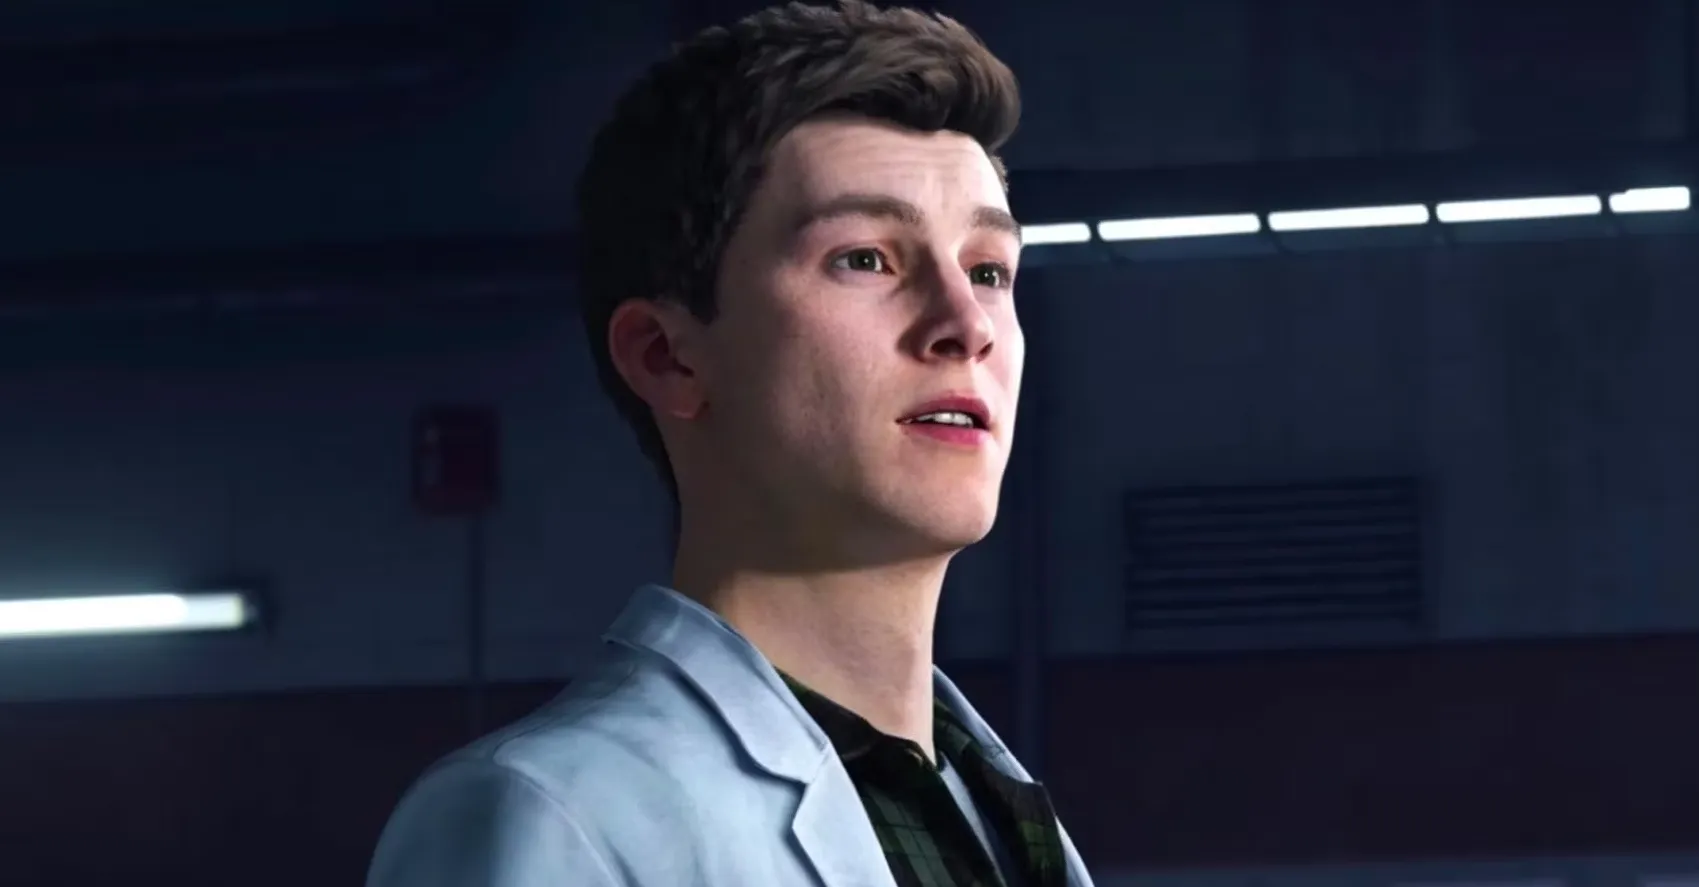 Do you guys know The Spider-Man Ps4 voice actor Yuri Lowenthal voiced peter  in the ios version of The amazing Spider-Man 2 mobile game : r/gaming